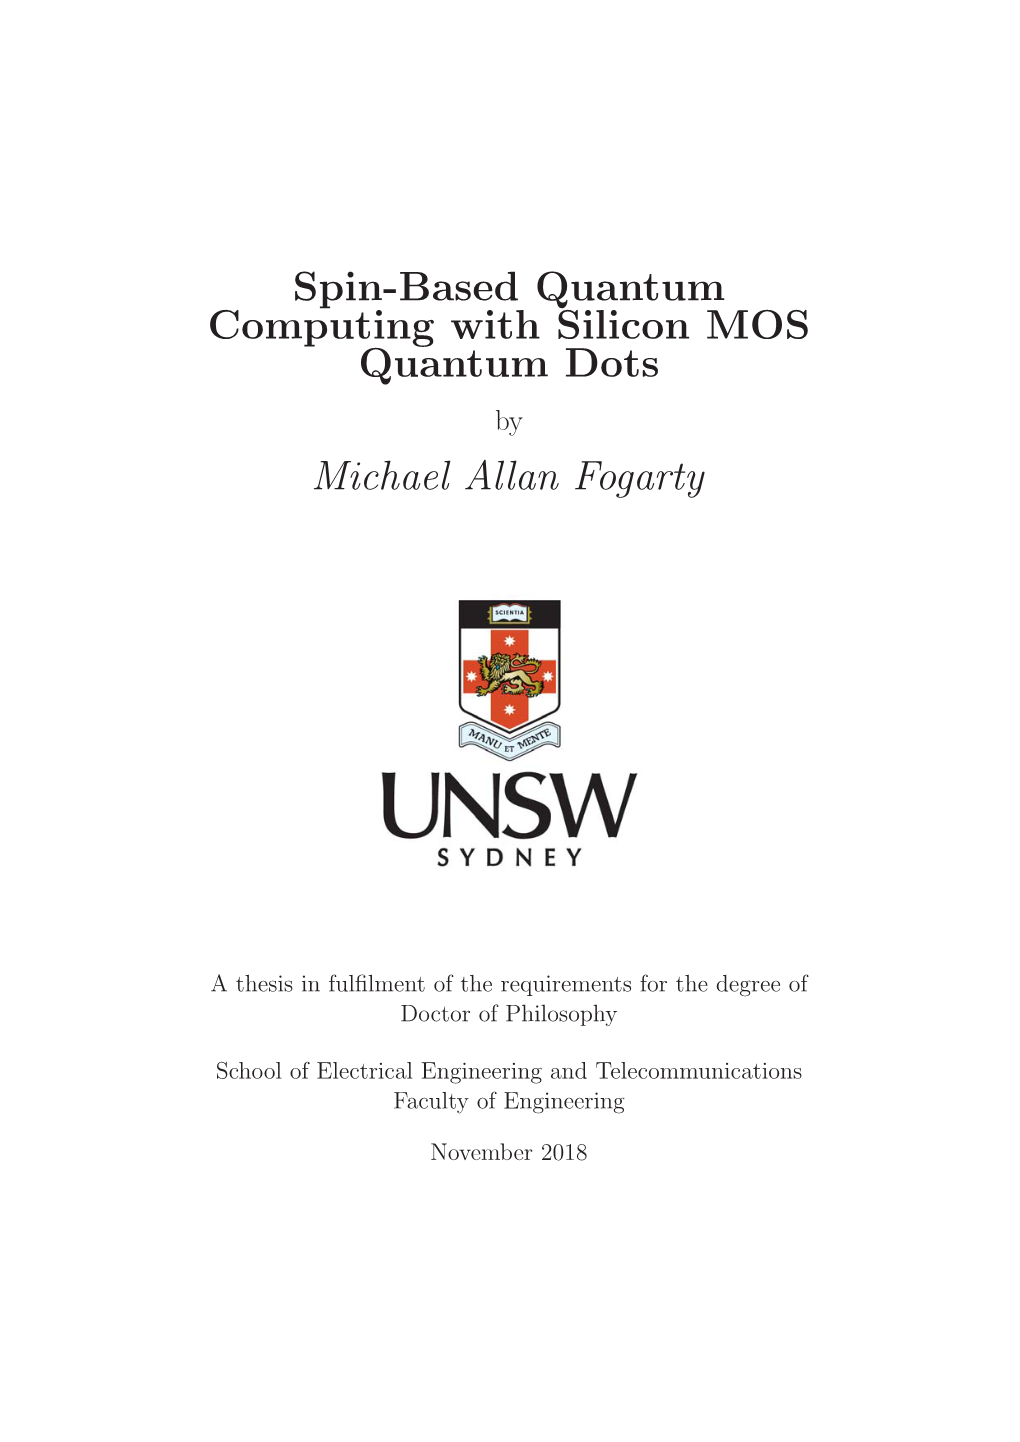 Spin-Based Quantum Computing with Silicon MOS Quantum Dots Michael